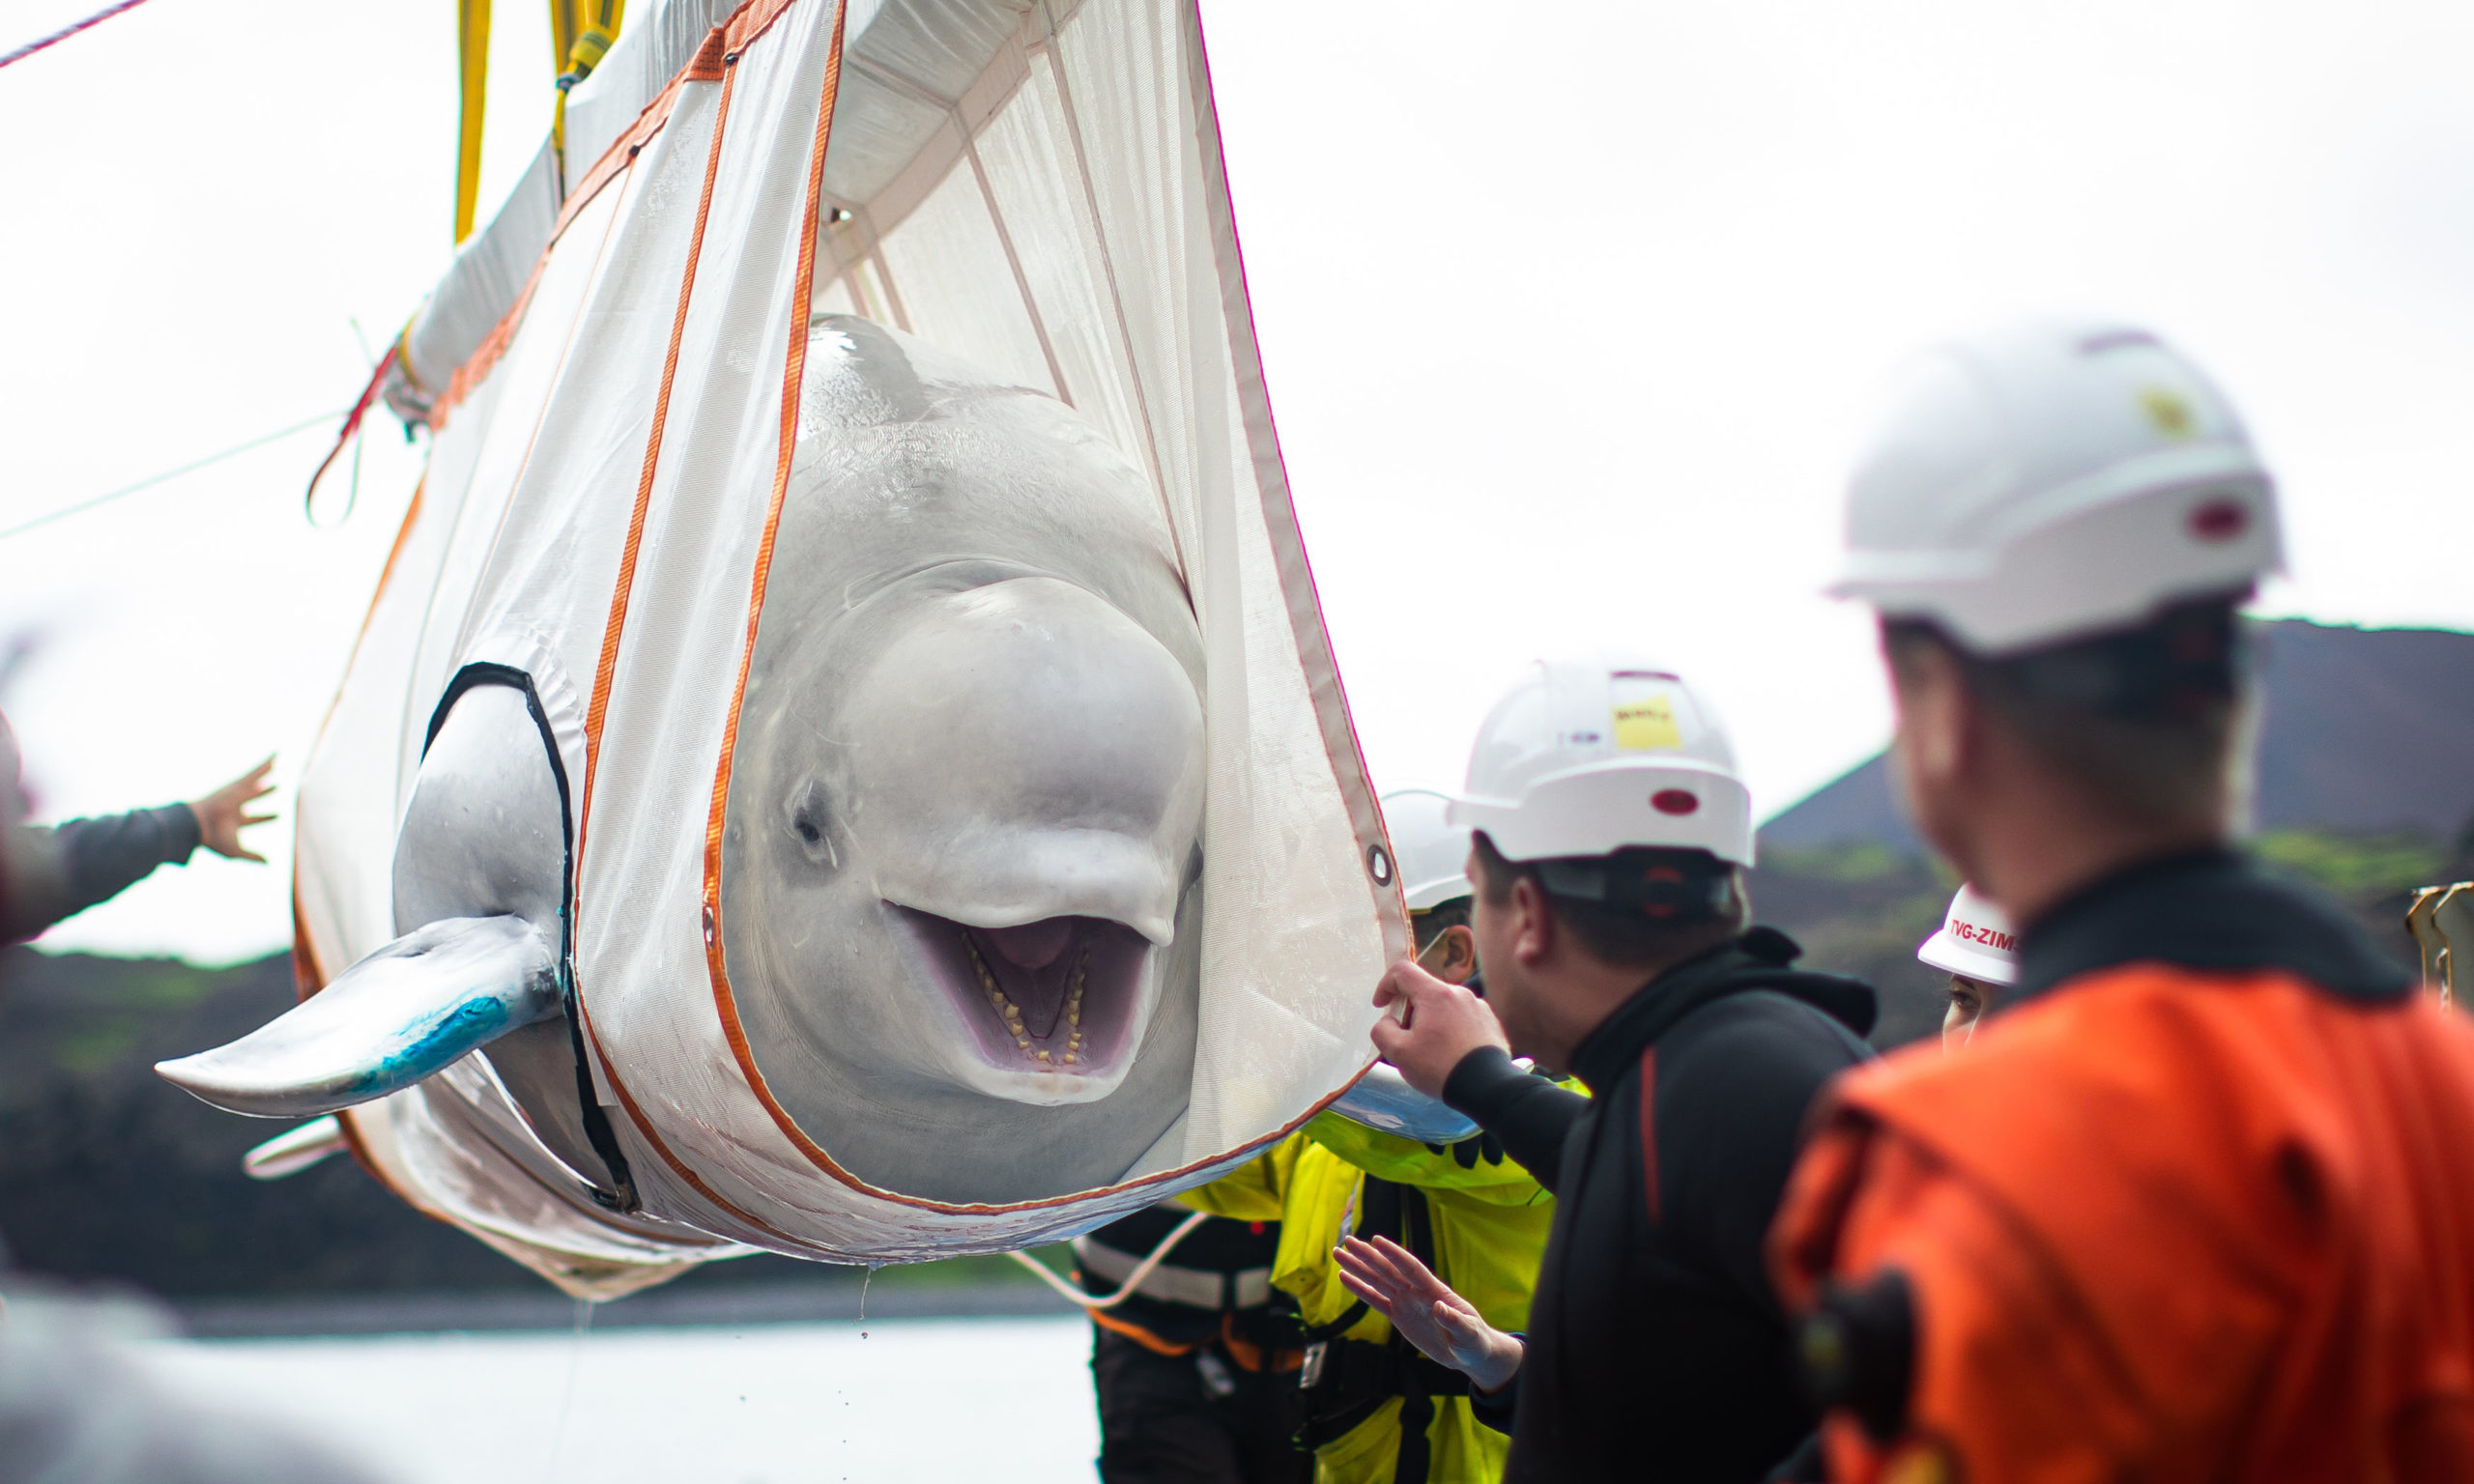 The Sea Life Trust team move Beluga Whale Little Gray from a tugboat during transfer to the bayside care pool where they will be acclimatised to the natural environment of their new home at the open water sanctuary in Klettsvik Bay in Iceland. The two Beluga whales, named Little Grey and Little White, are being moved to the world's first open-water whale sanctuary after travelling from an aquarium in China 6,000 miles away in June 2019. PA Photo. Issue date: Monday August 10, 2020. Little Gray and Little White have been living in a temporary care facility for the past year, with preparations for the move to open water including adding more blubber to ready them for the cooler temperatures, as well as being introduced to natural flora and fauna. See PA story ANIMALS Belugas. Photo credit should read: Aaron Chown/PA Wire